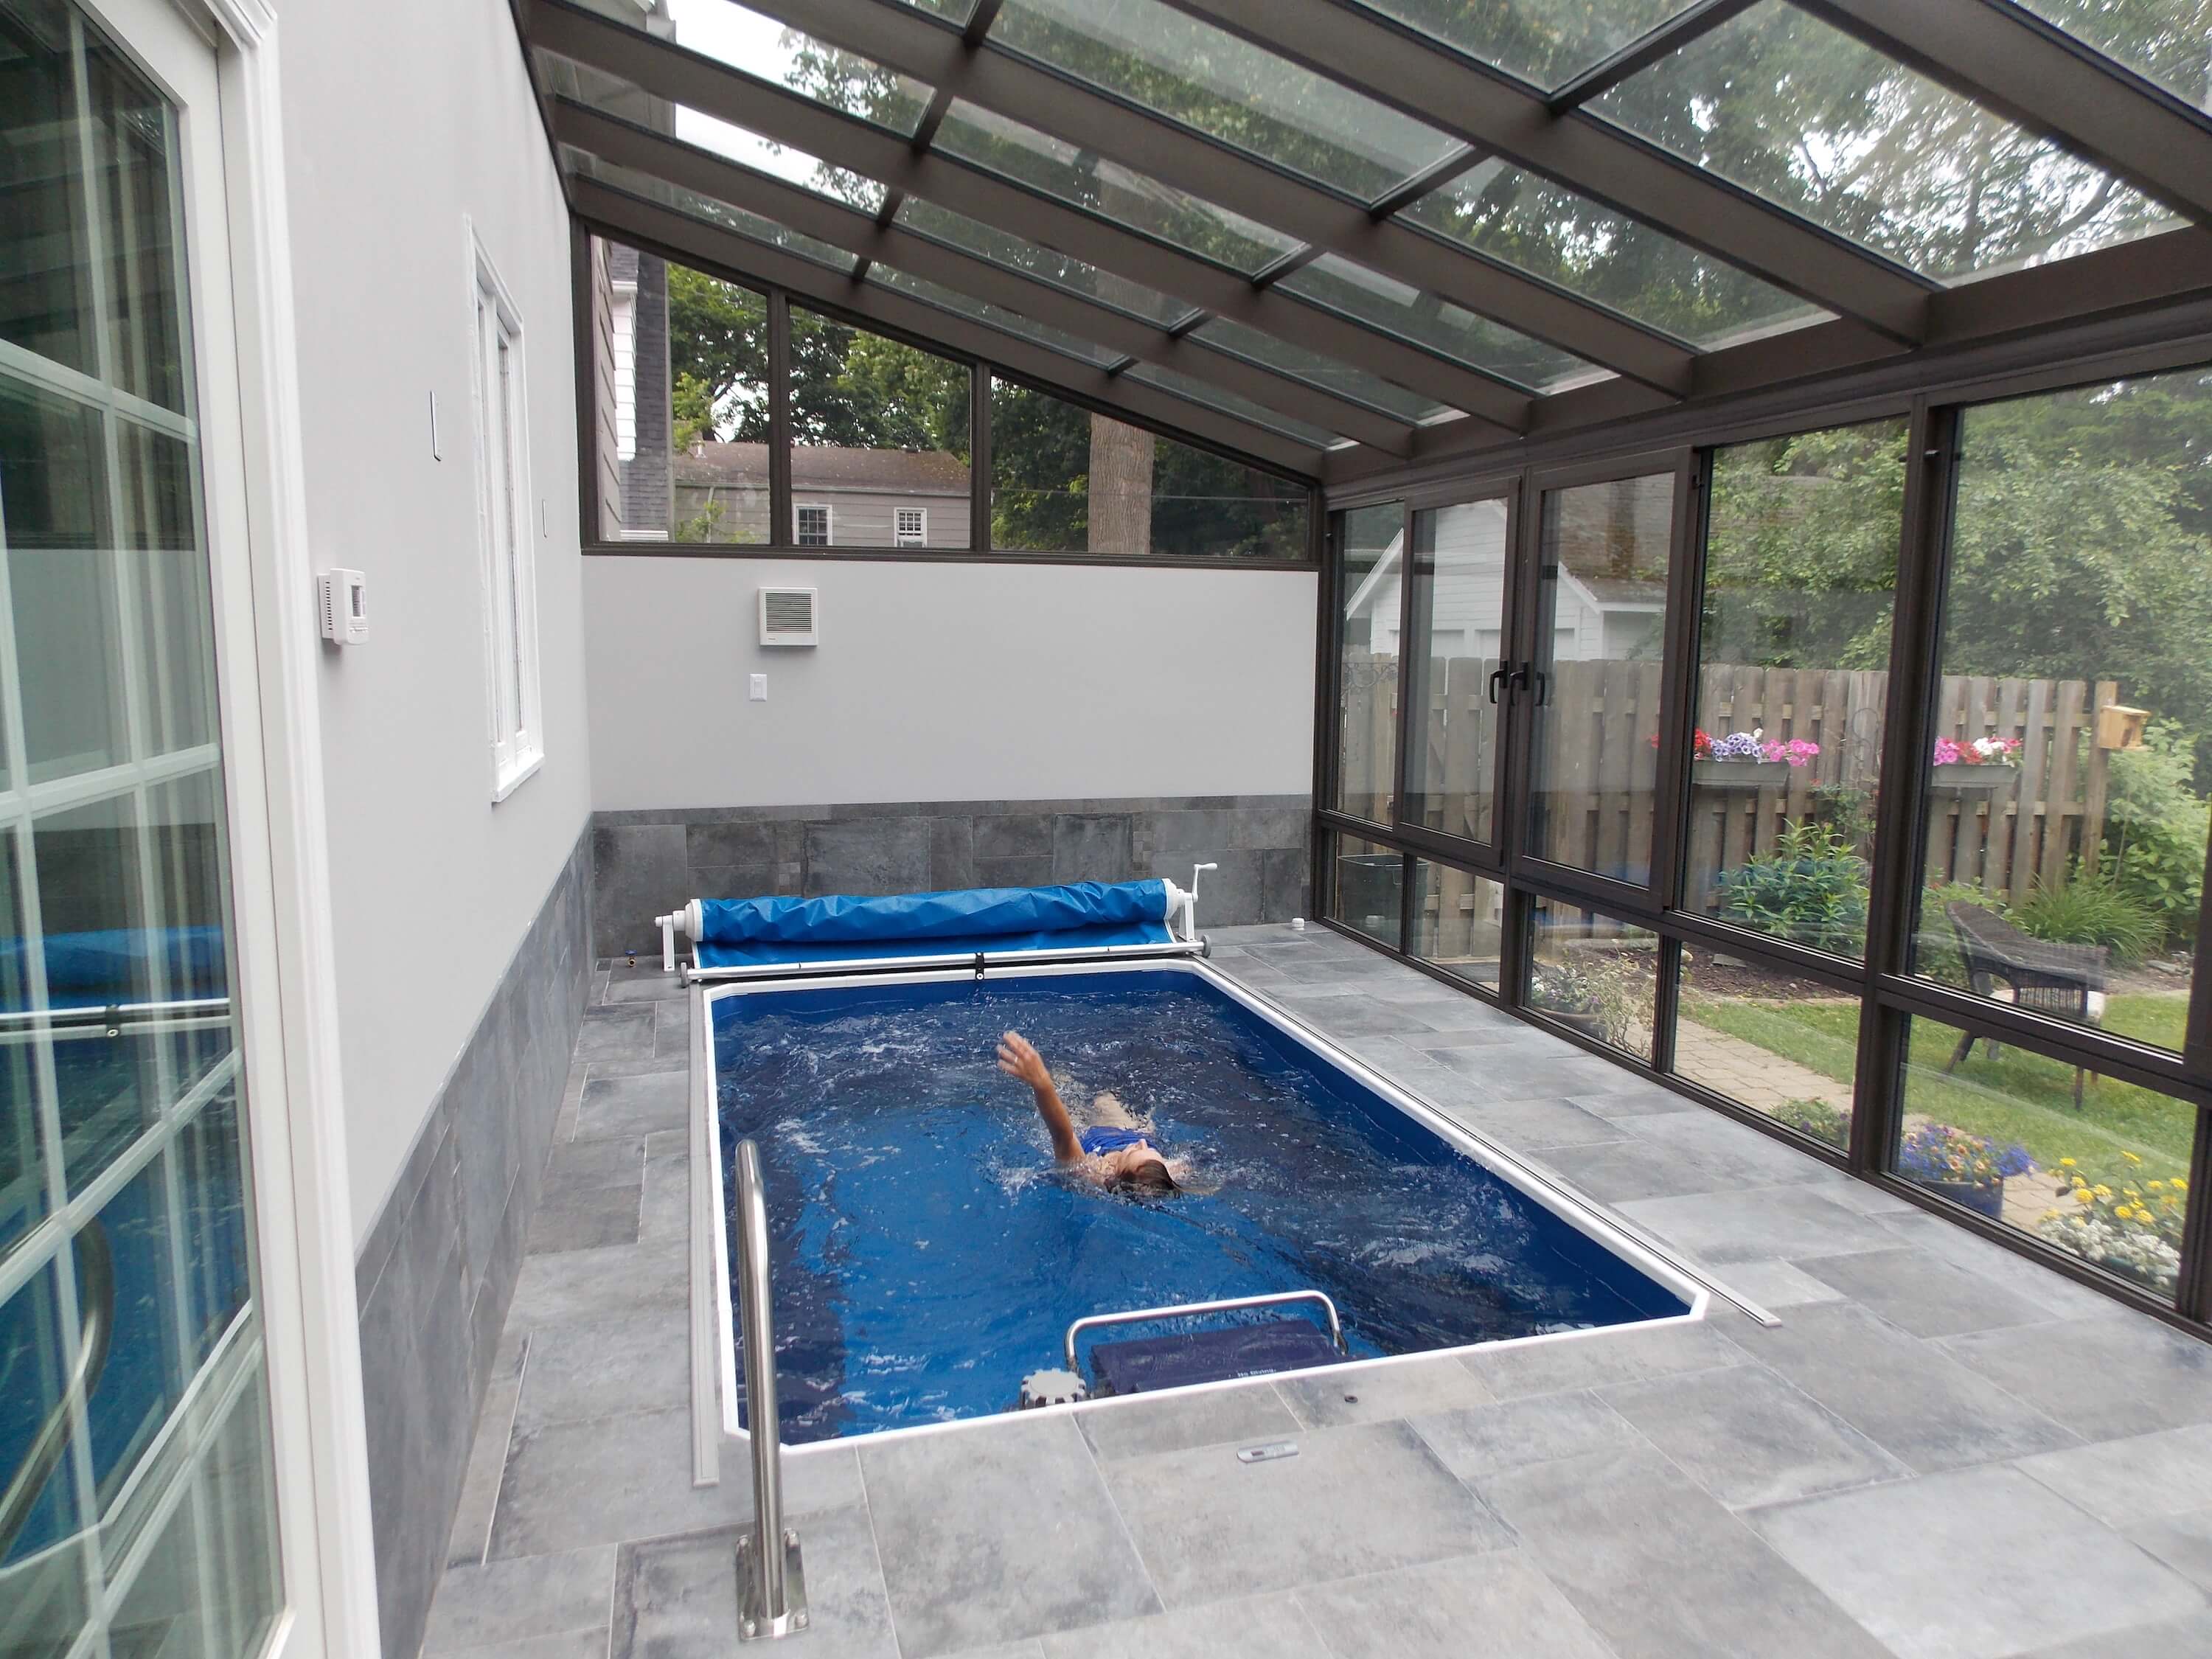 How Much Does an Endless Pool Cost? () - Bob Vila